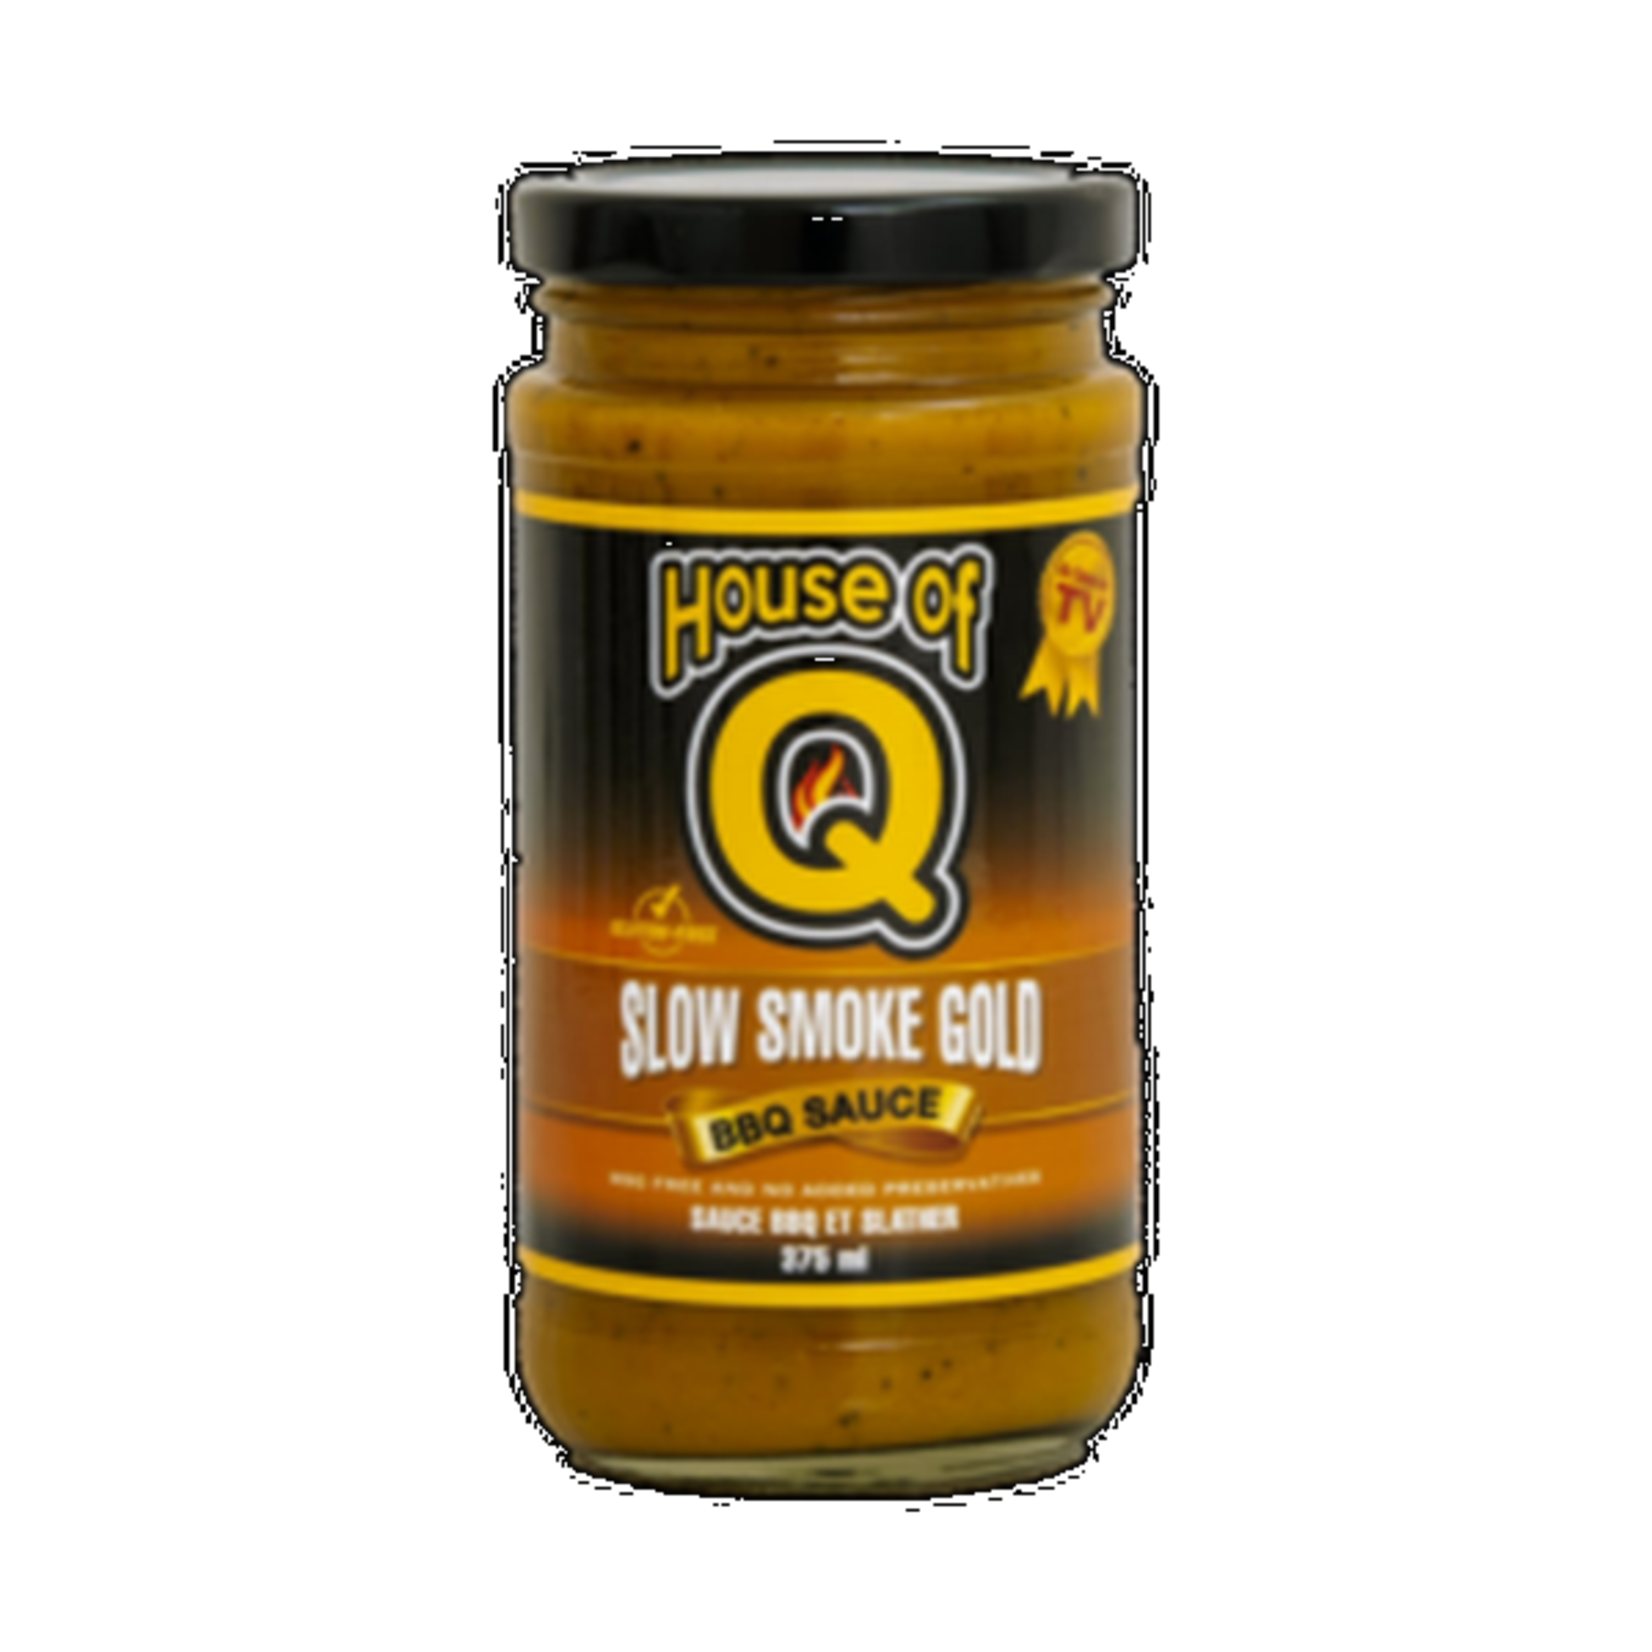 House of Q House of Q Slow Smoke Gold (375 ml)